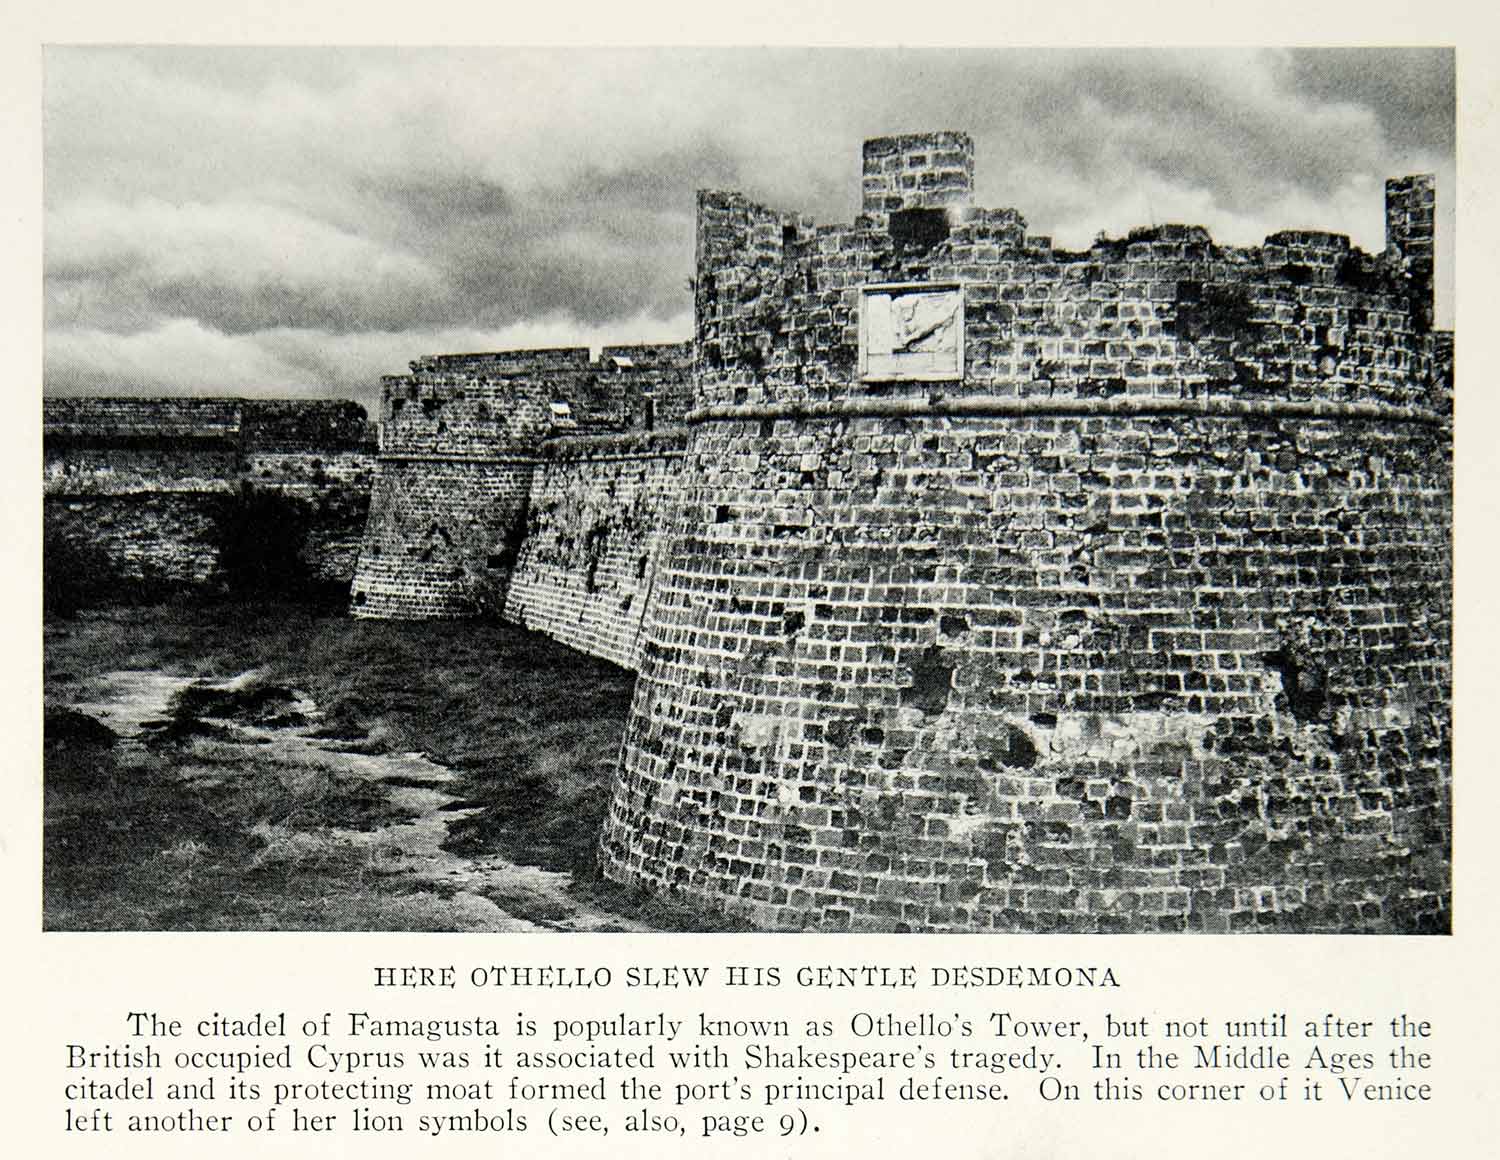 1928 Print Famagusta Citadel Othello Tower Architecture Fortress NGMA1